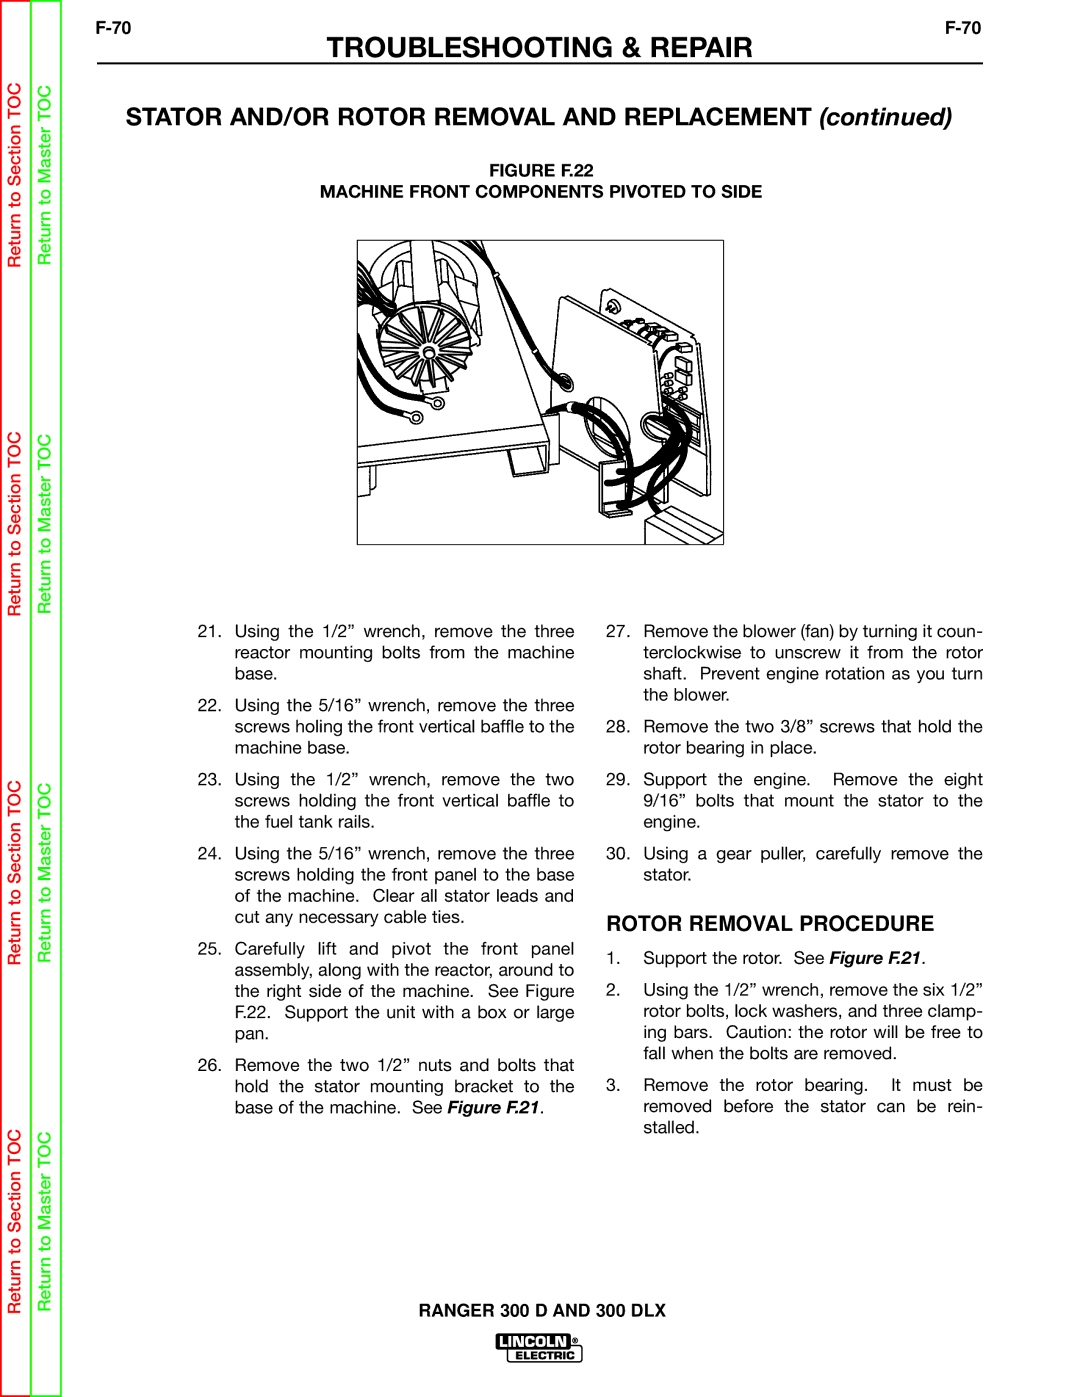 Lincoln Electric SVM148-B service manual Stator AND/OR Rotor Removal and Replacement, Rotor Removal Procedure 